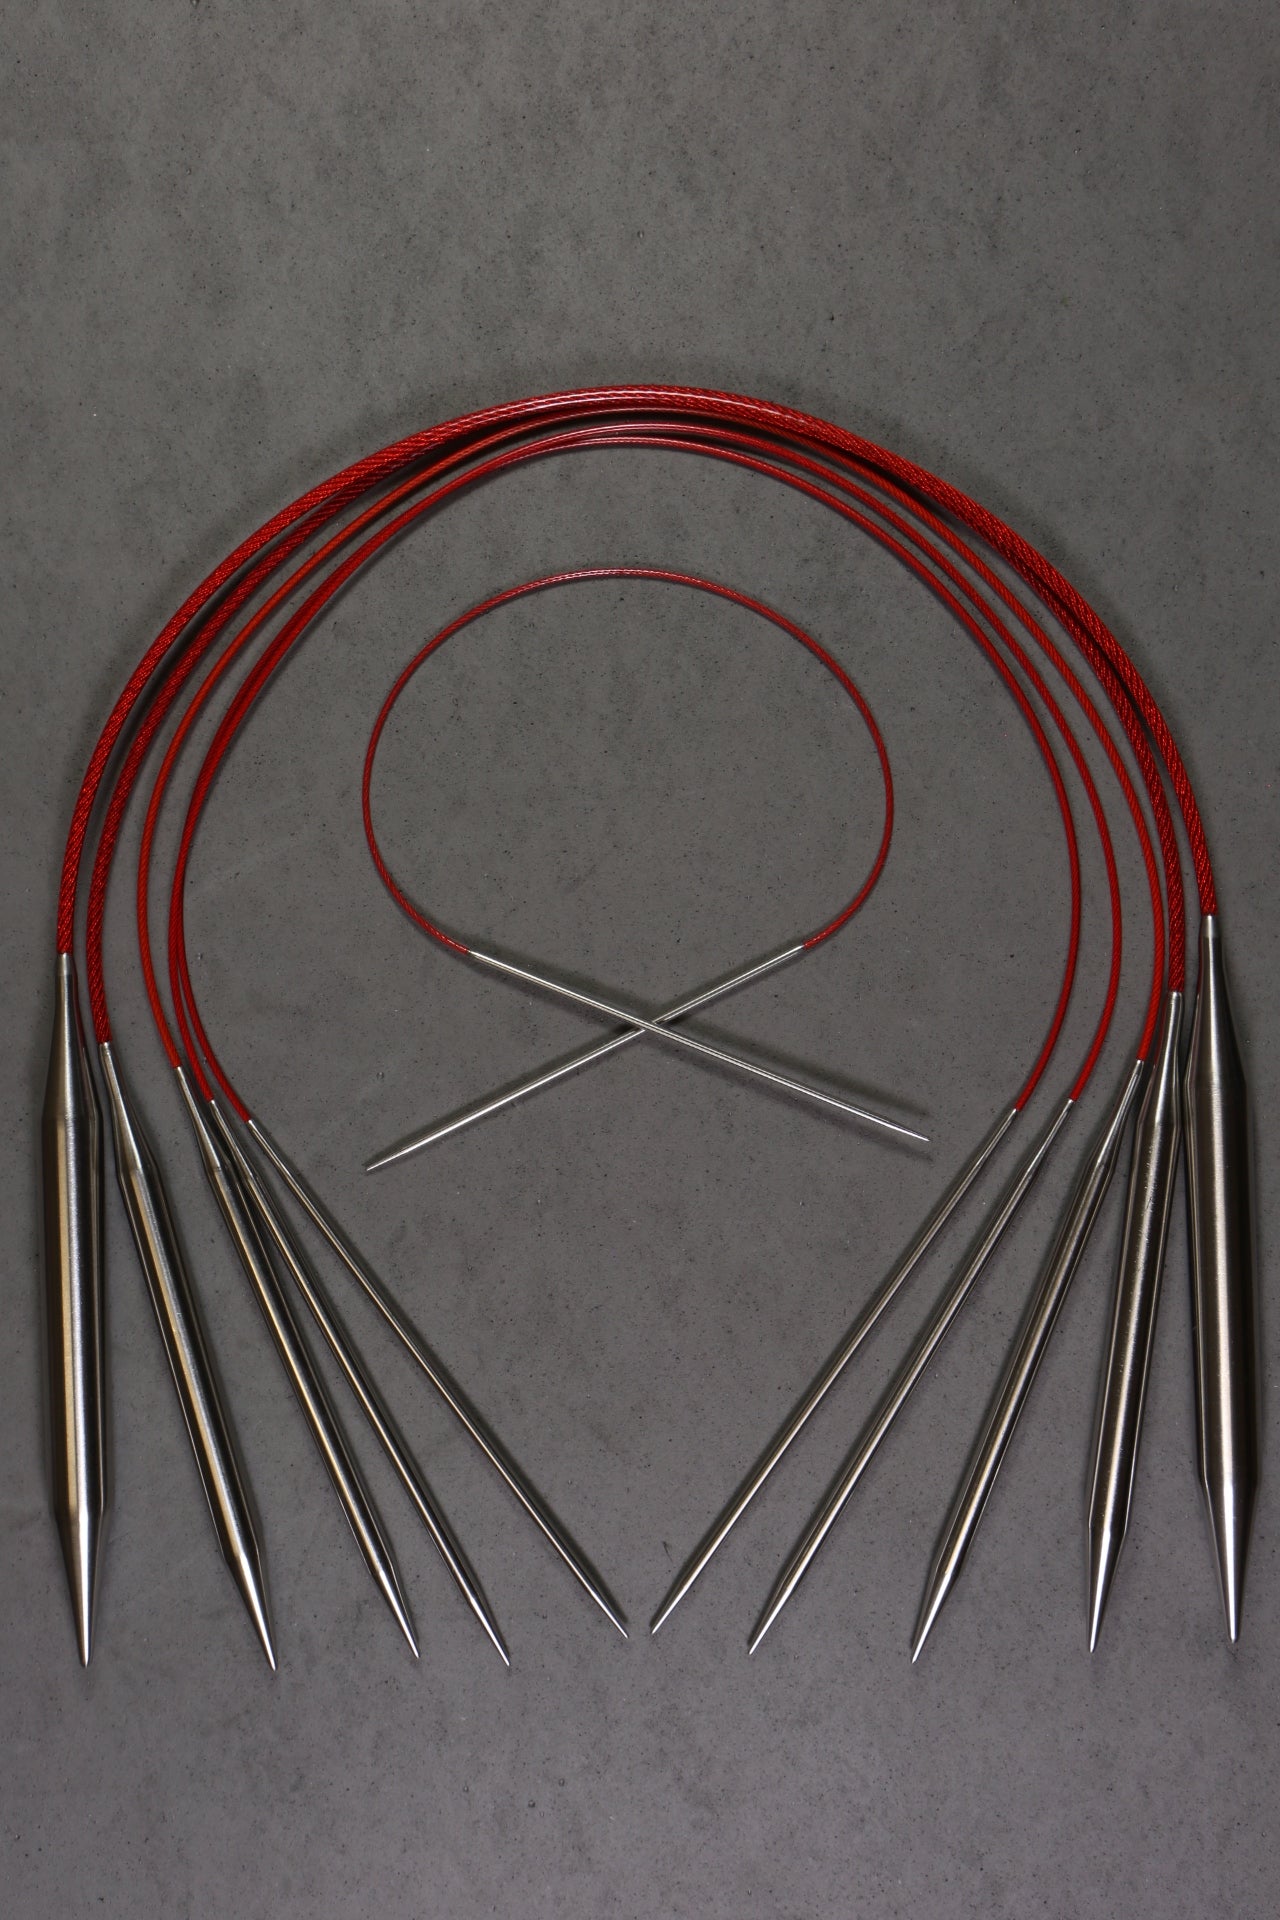 ChiaoGoo Red Lace Stainless Circular Knitting Needles 40